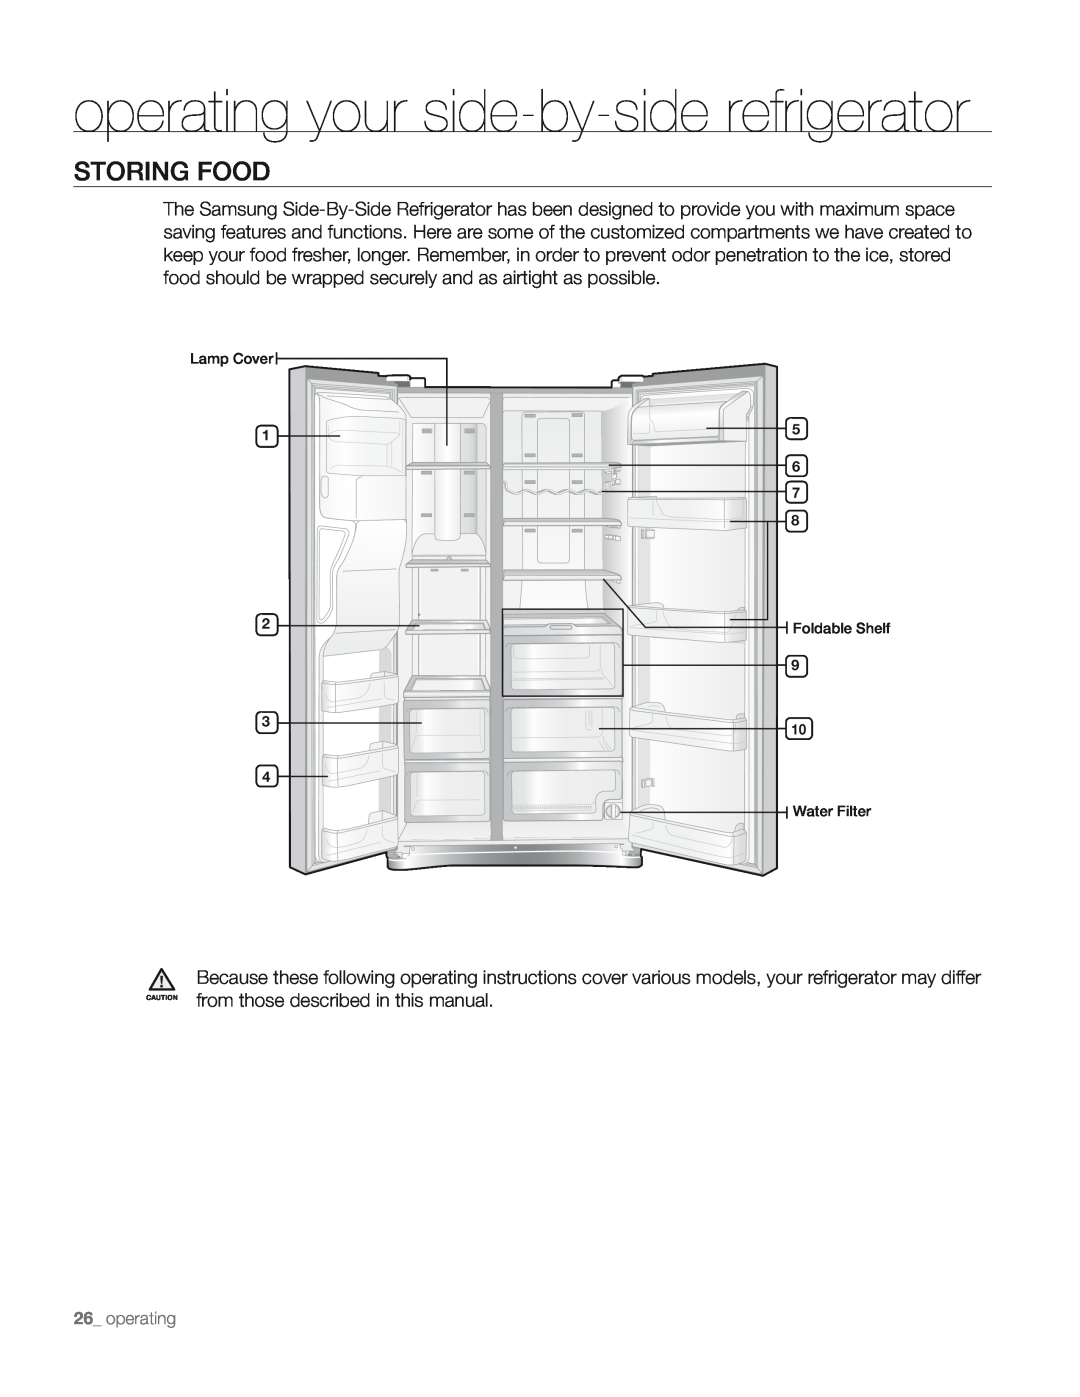 Samsung DA68-01890M user manual Storing Food, operating your side-by-side refrigerator, from those described in this manual 